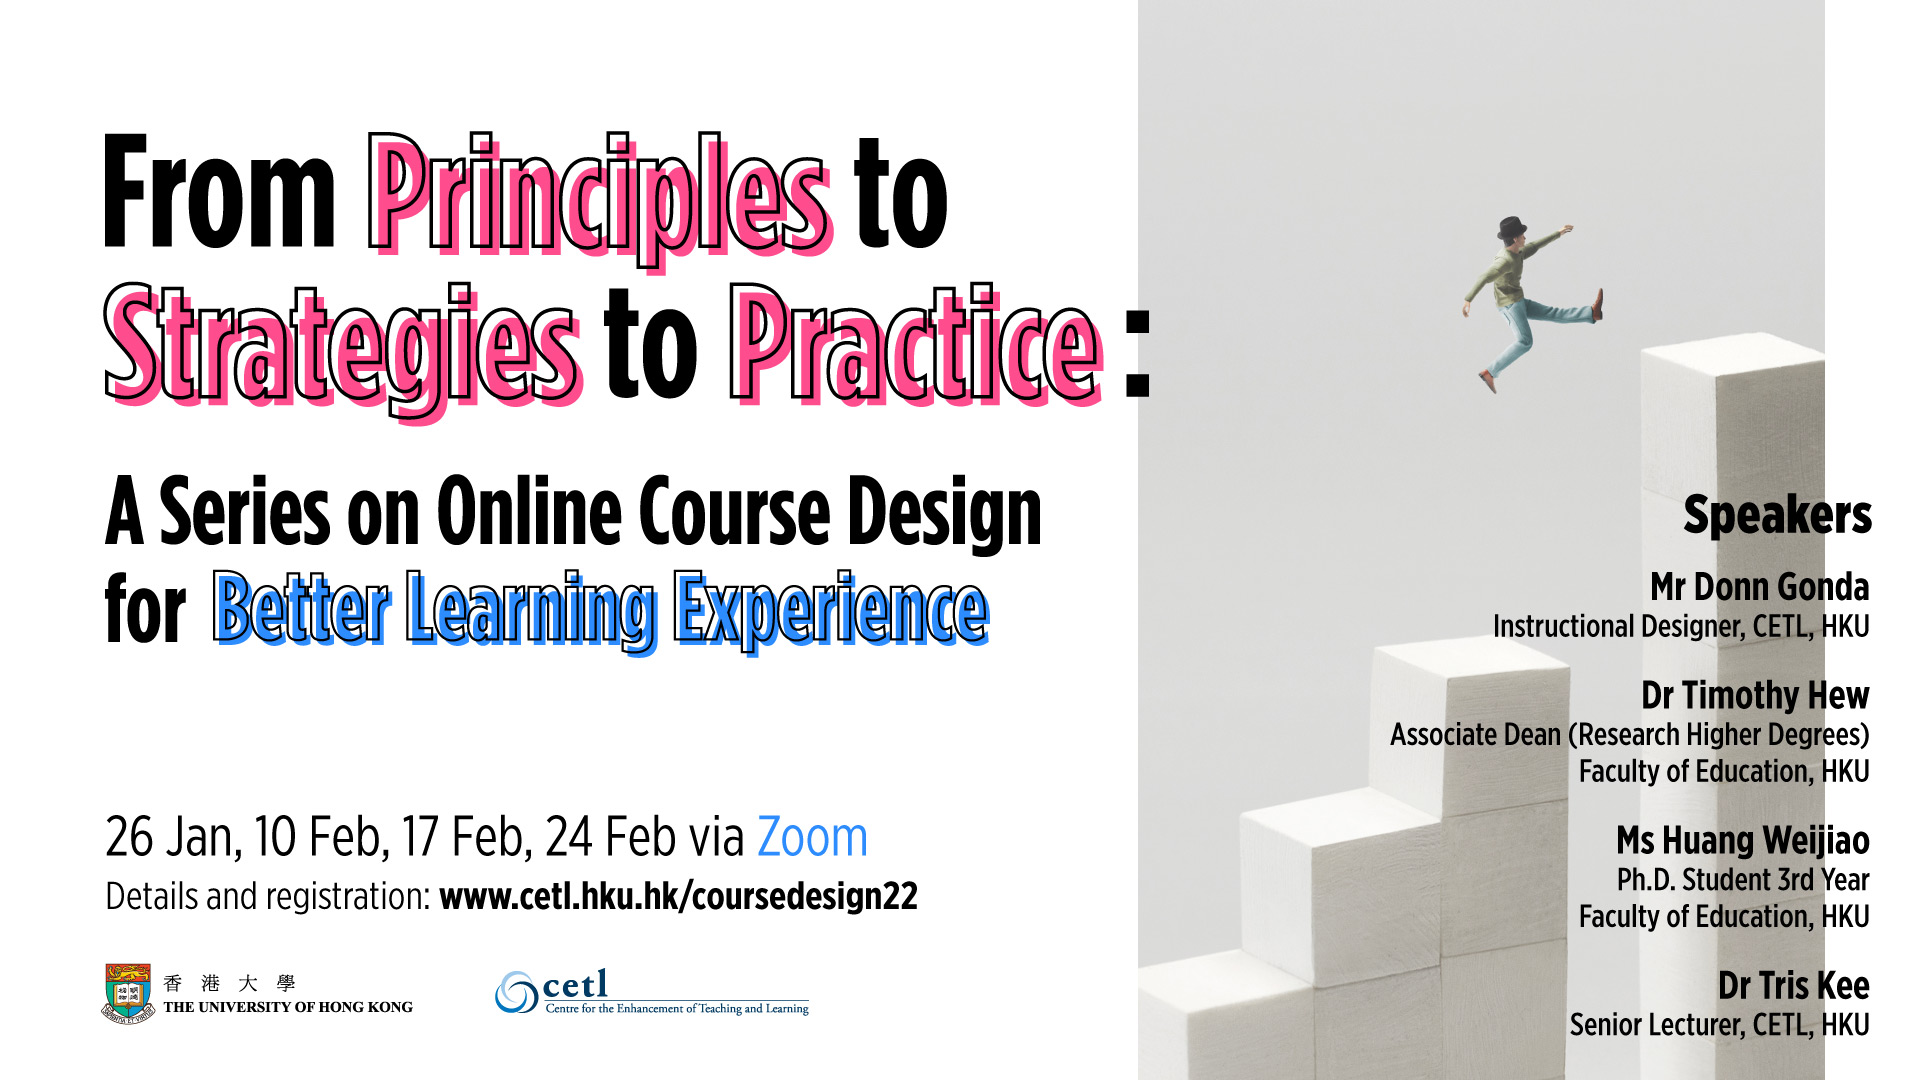 From Principles to Strategies to Practice: A Series on Online Course Design for Better Learning Experience, 26 Jan – 24 Feb 2022